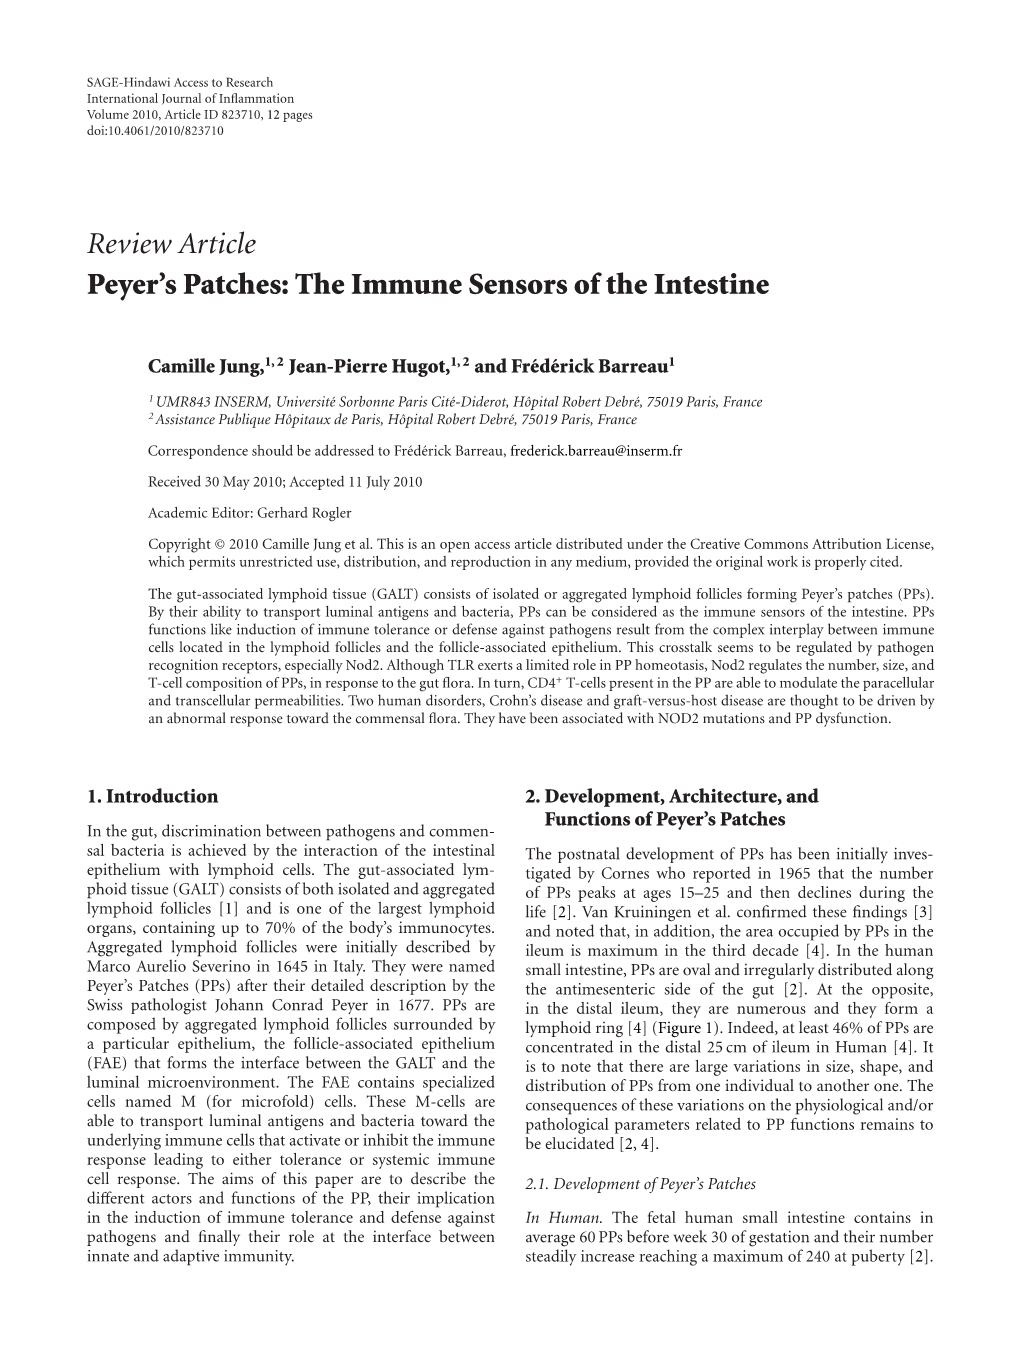 Peyer's Patches: the Immune Sensors of the Intestine